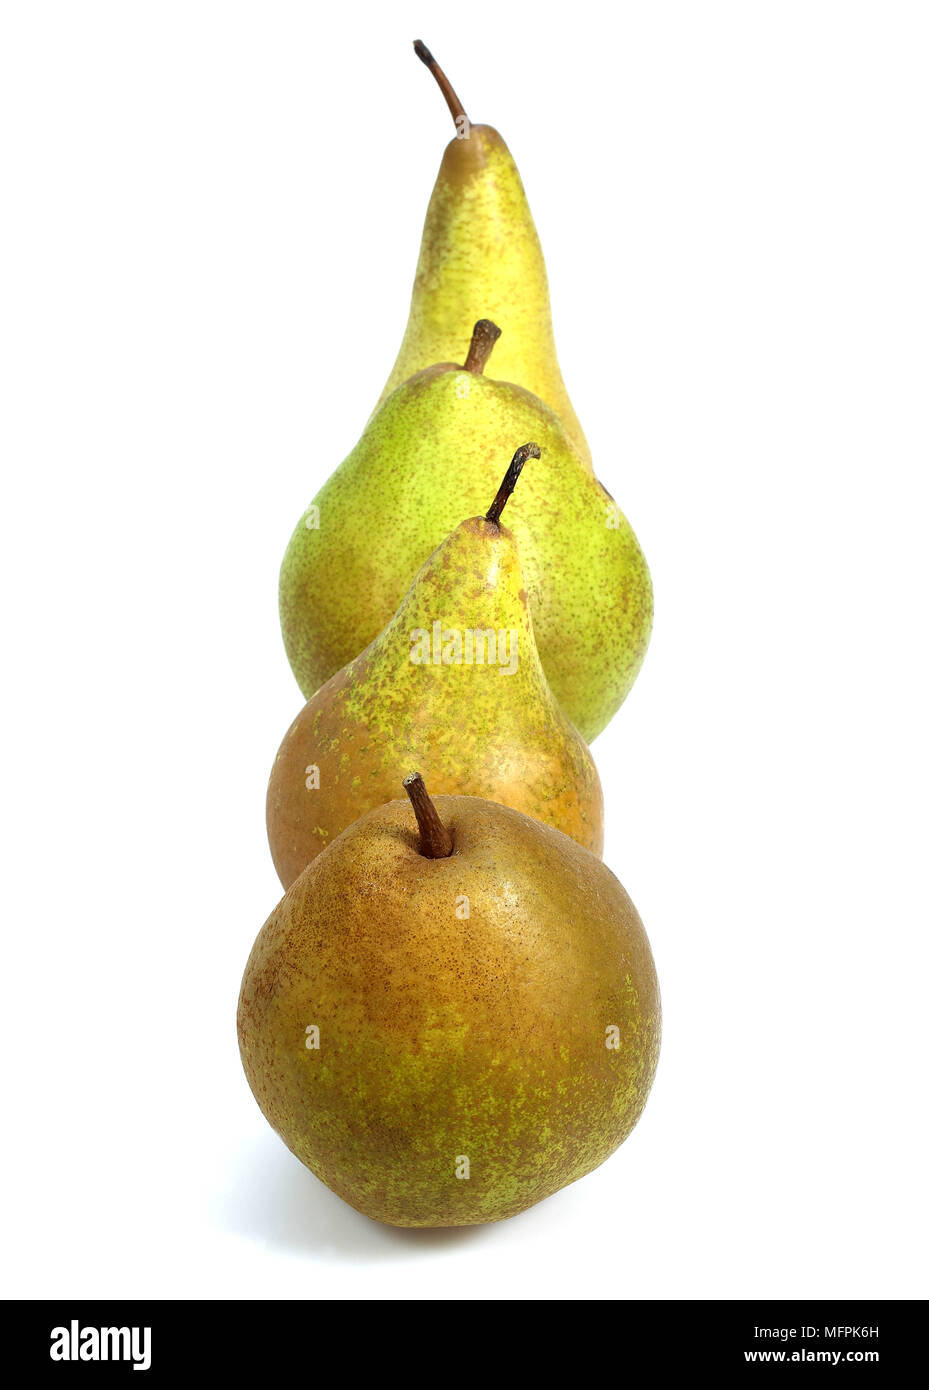 Comice Pear, Williams Pear, Beurre Hardy Pear, Conference Pear, pyrus communis, Fruits against White Background Stock Photo